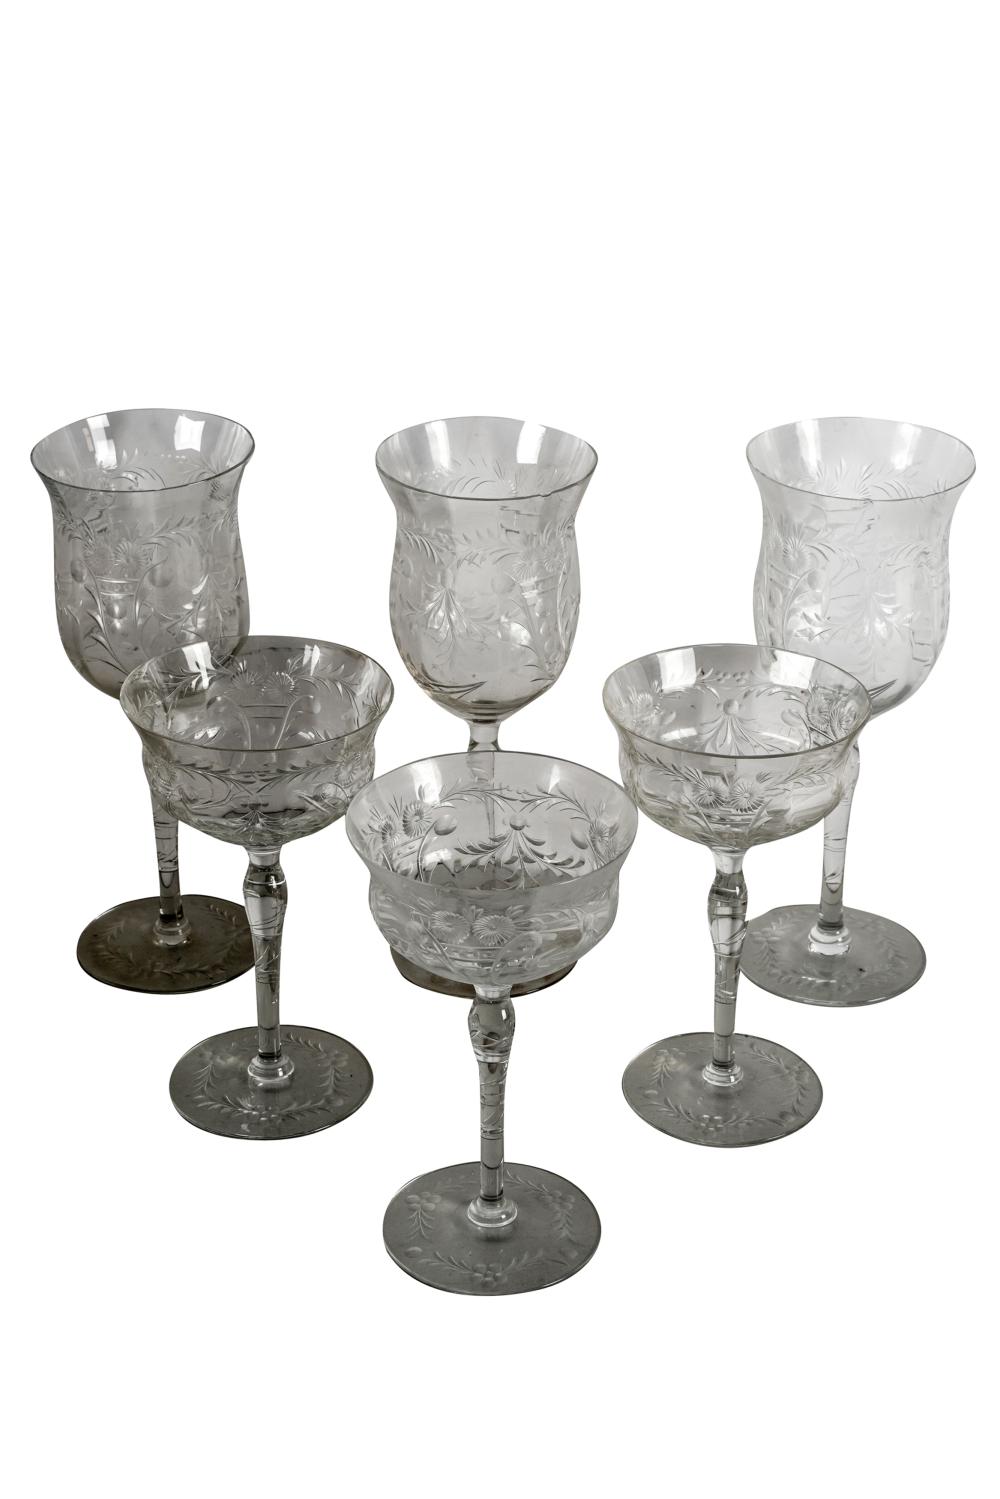 COLLECTION OF PRESSED GLASS STEMWAREunsigned,